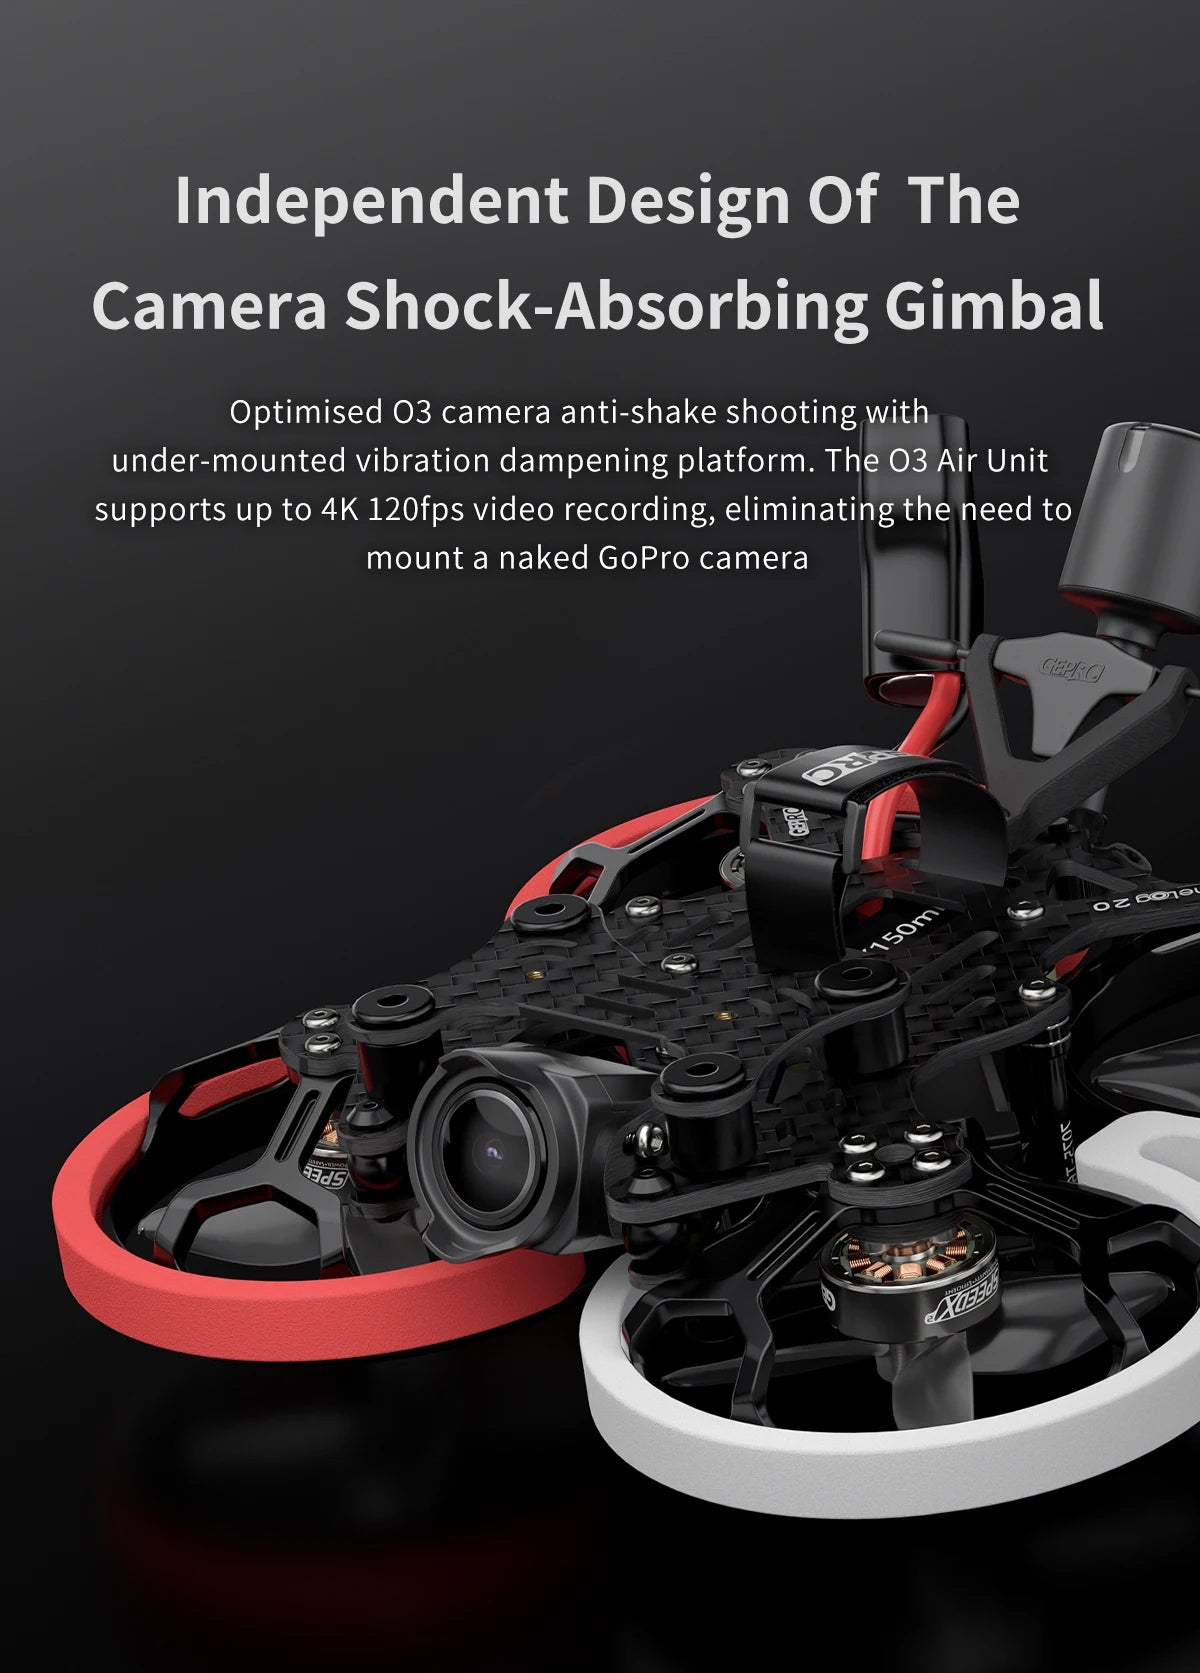 GEPRC Cinelog20 HD - O3 AIR Unit  FPV, GEPRC Cinelog20 HD, the 03 Air Unit supports up to 4K 120fps video recording . GoPro